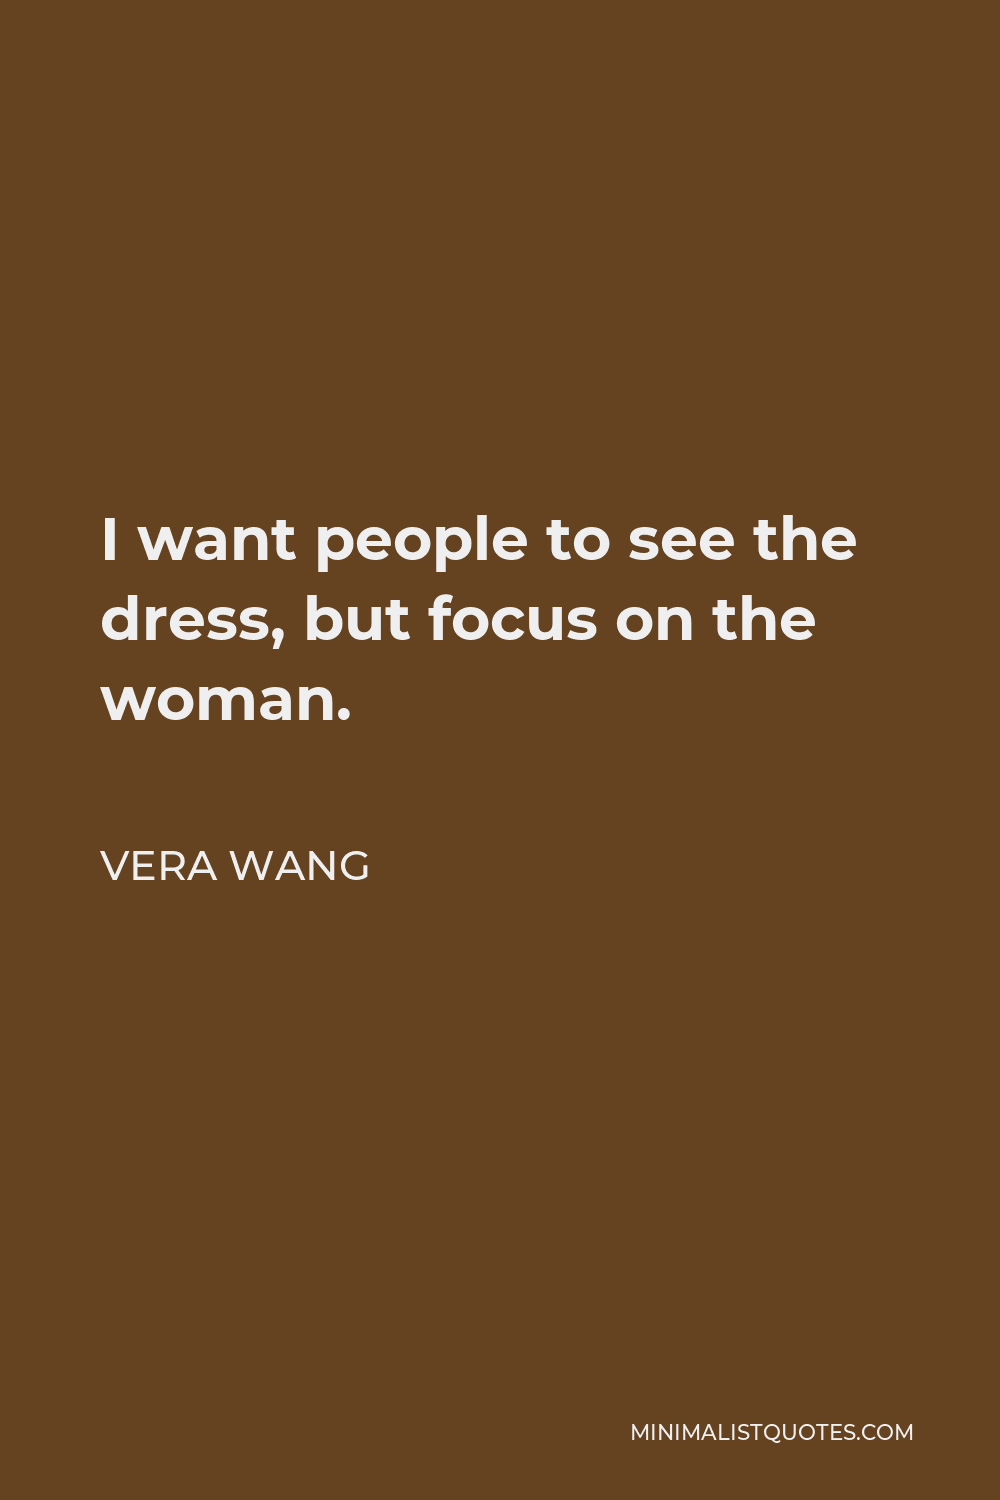 Vera Wang Quote - I want people to see the dress, but focus on the woman.